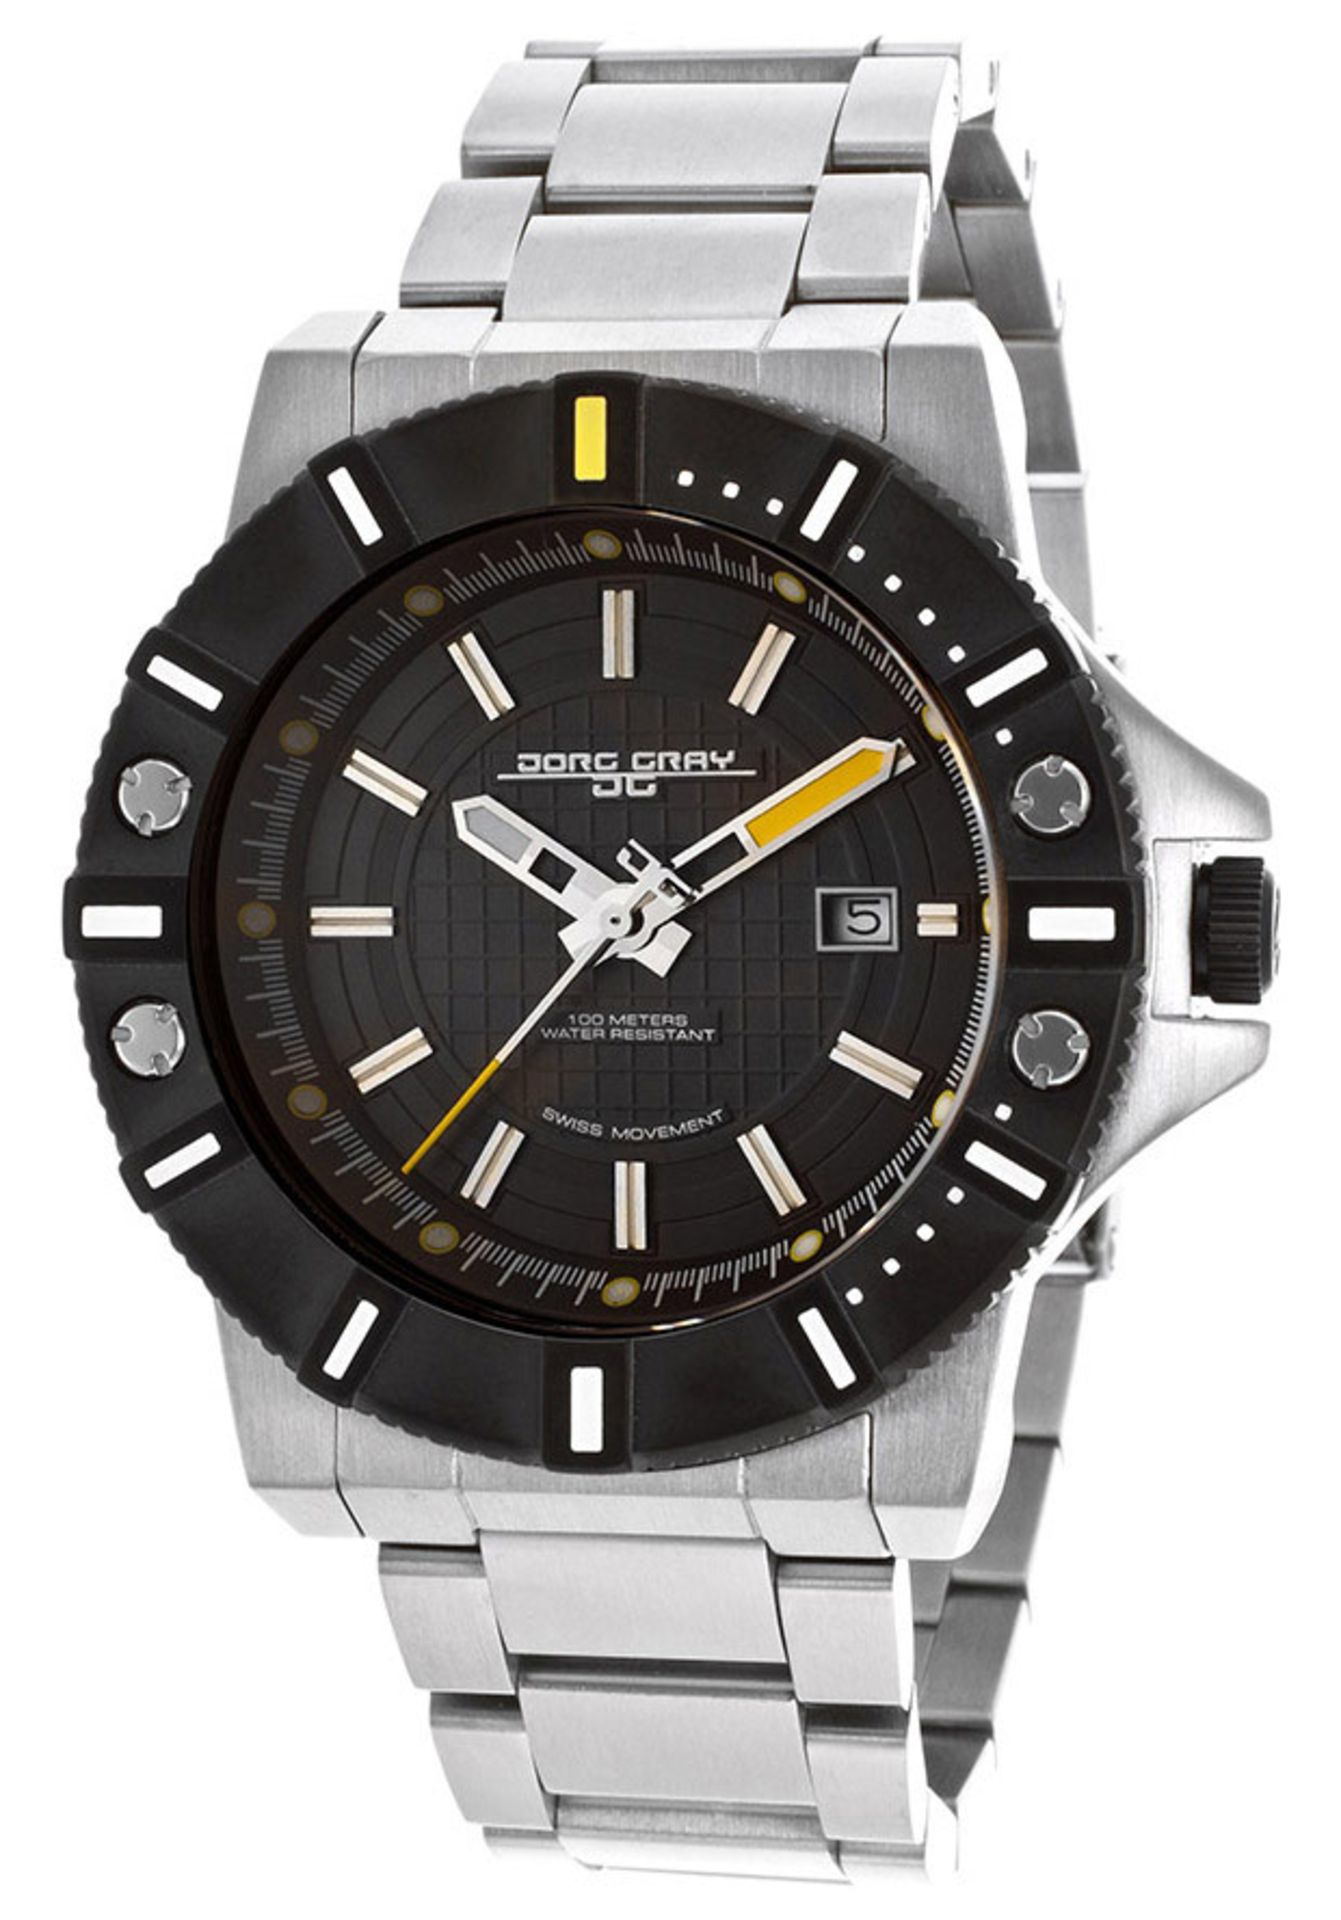 1 x Jorg Gray Men's Analogue Watch JG9500-22 with Black Dial and Stainless Steel Bracelet -Online